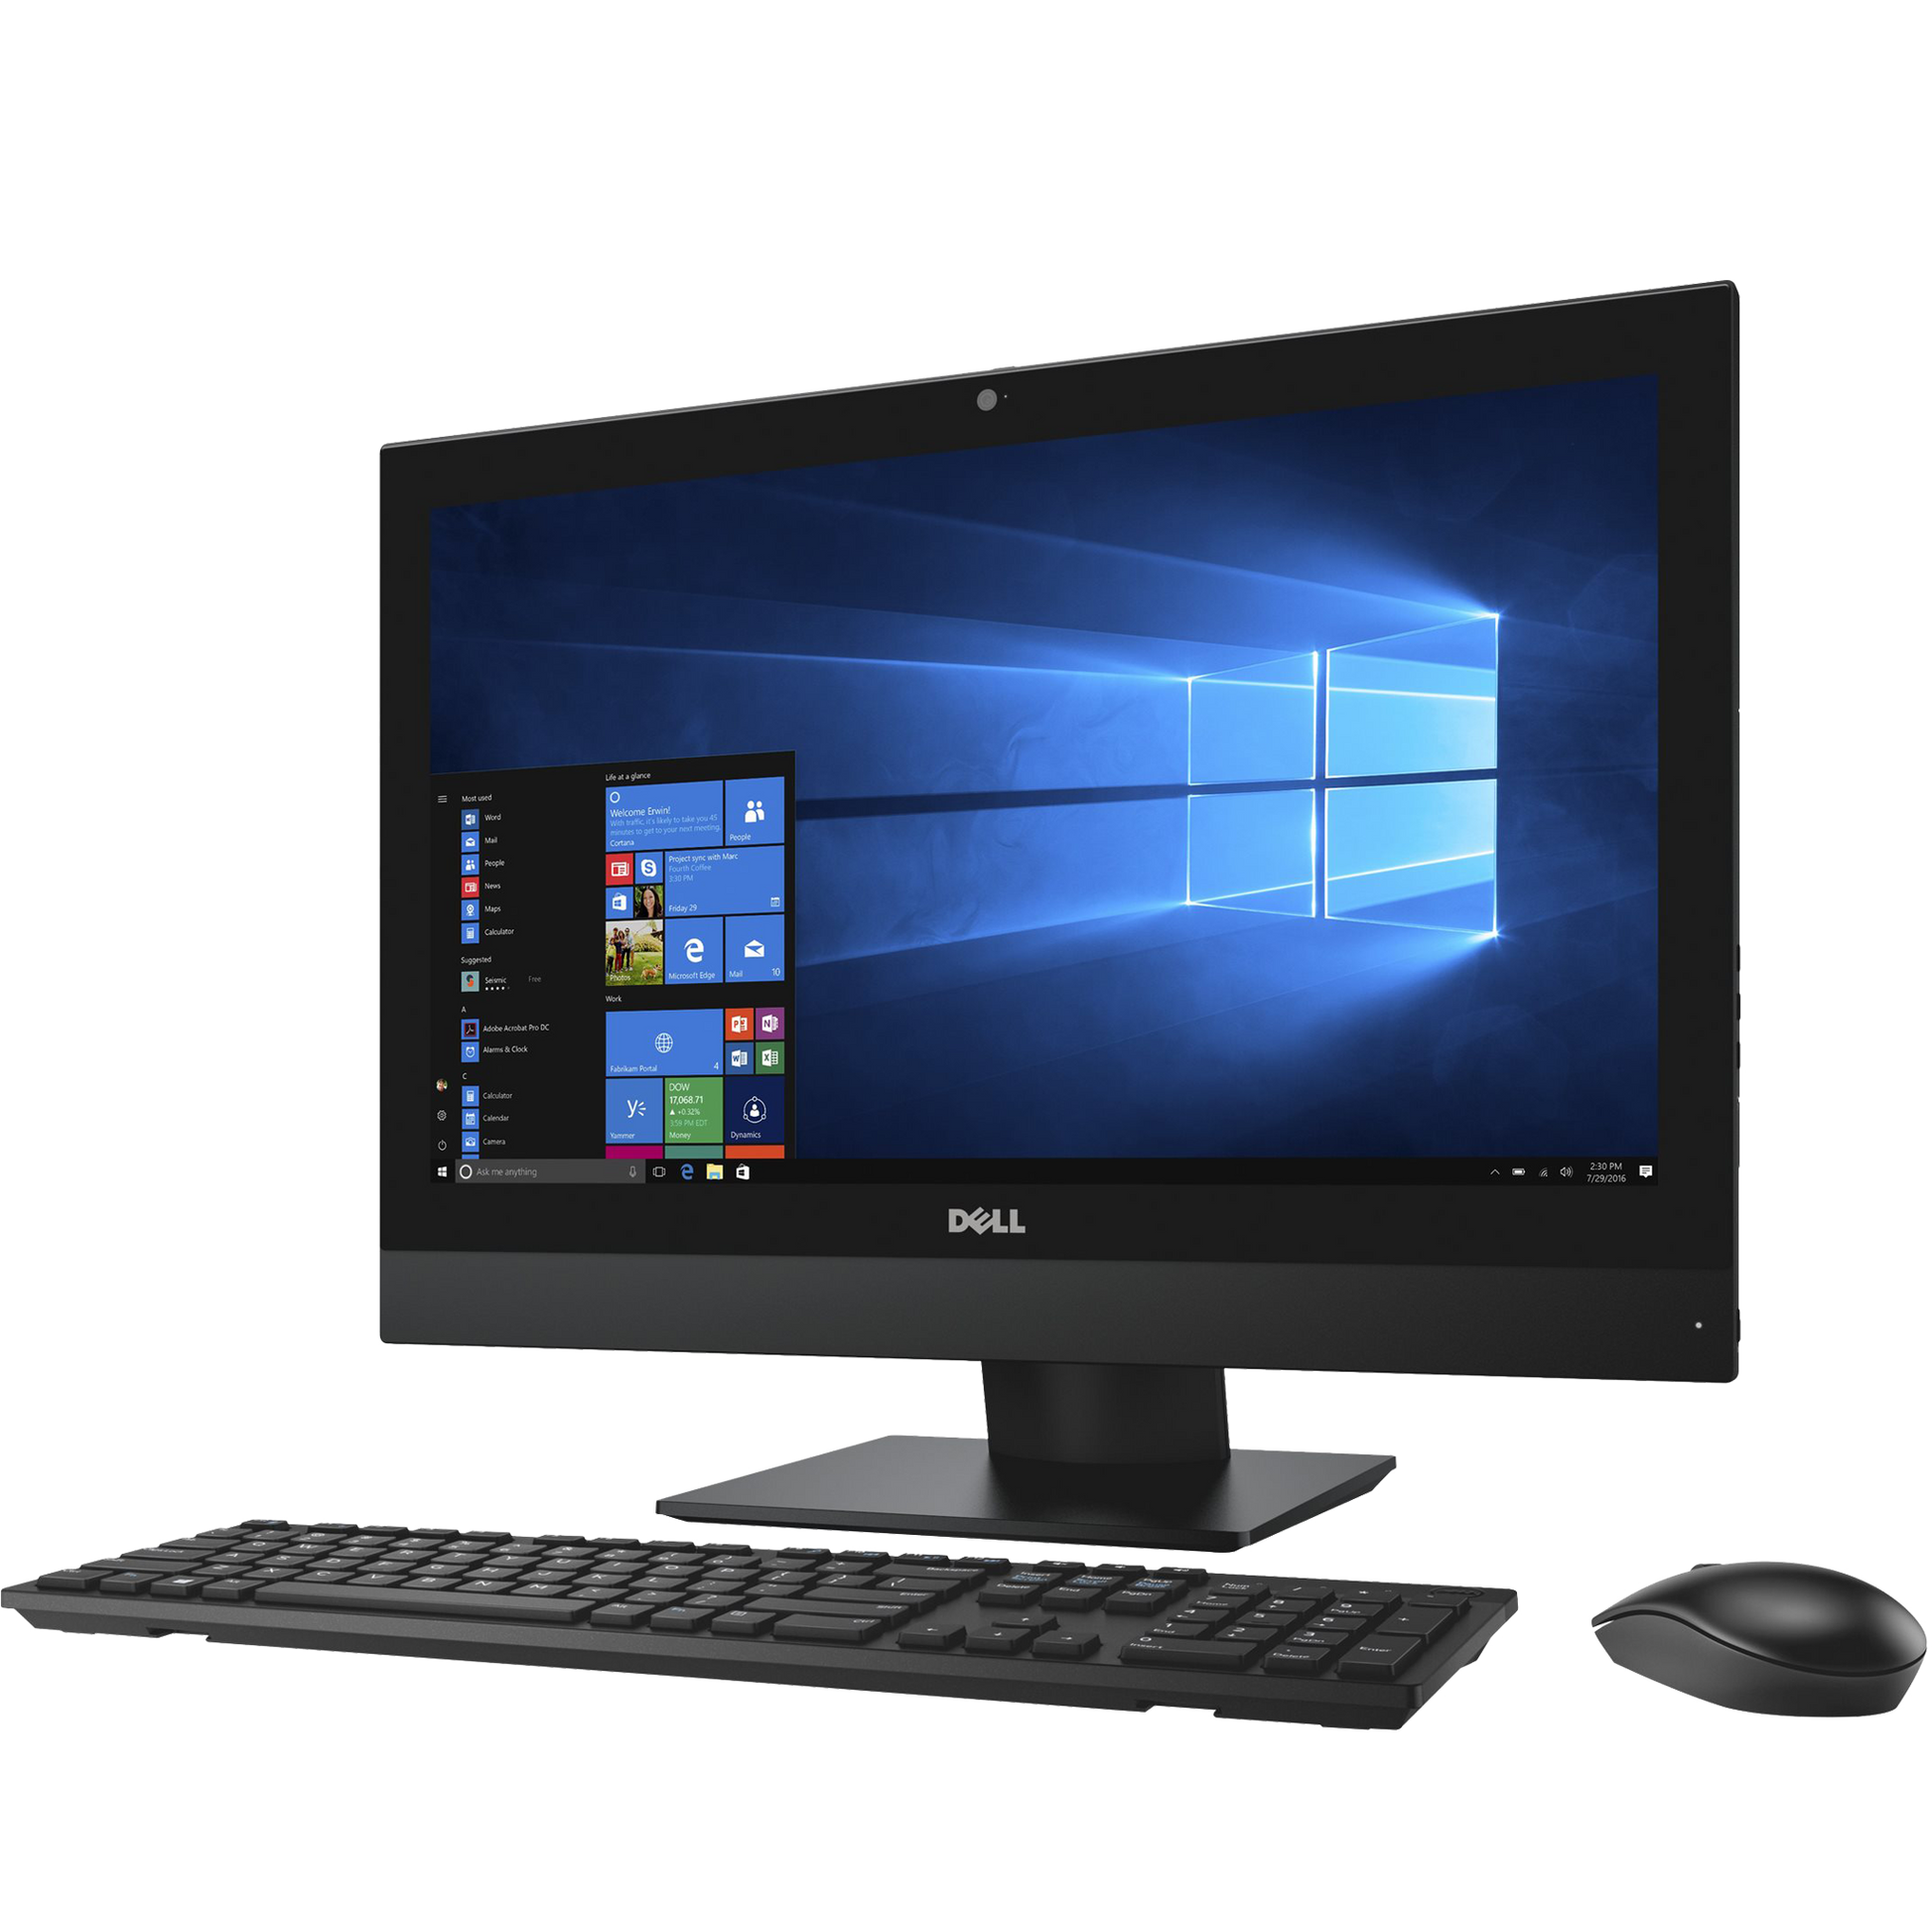 Dell OptiPlex 5250 All-in-One Desktop PC Front Right with Keyboard and Mouse